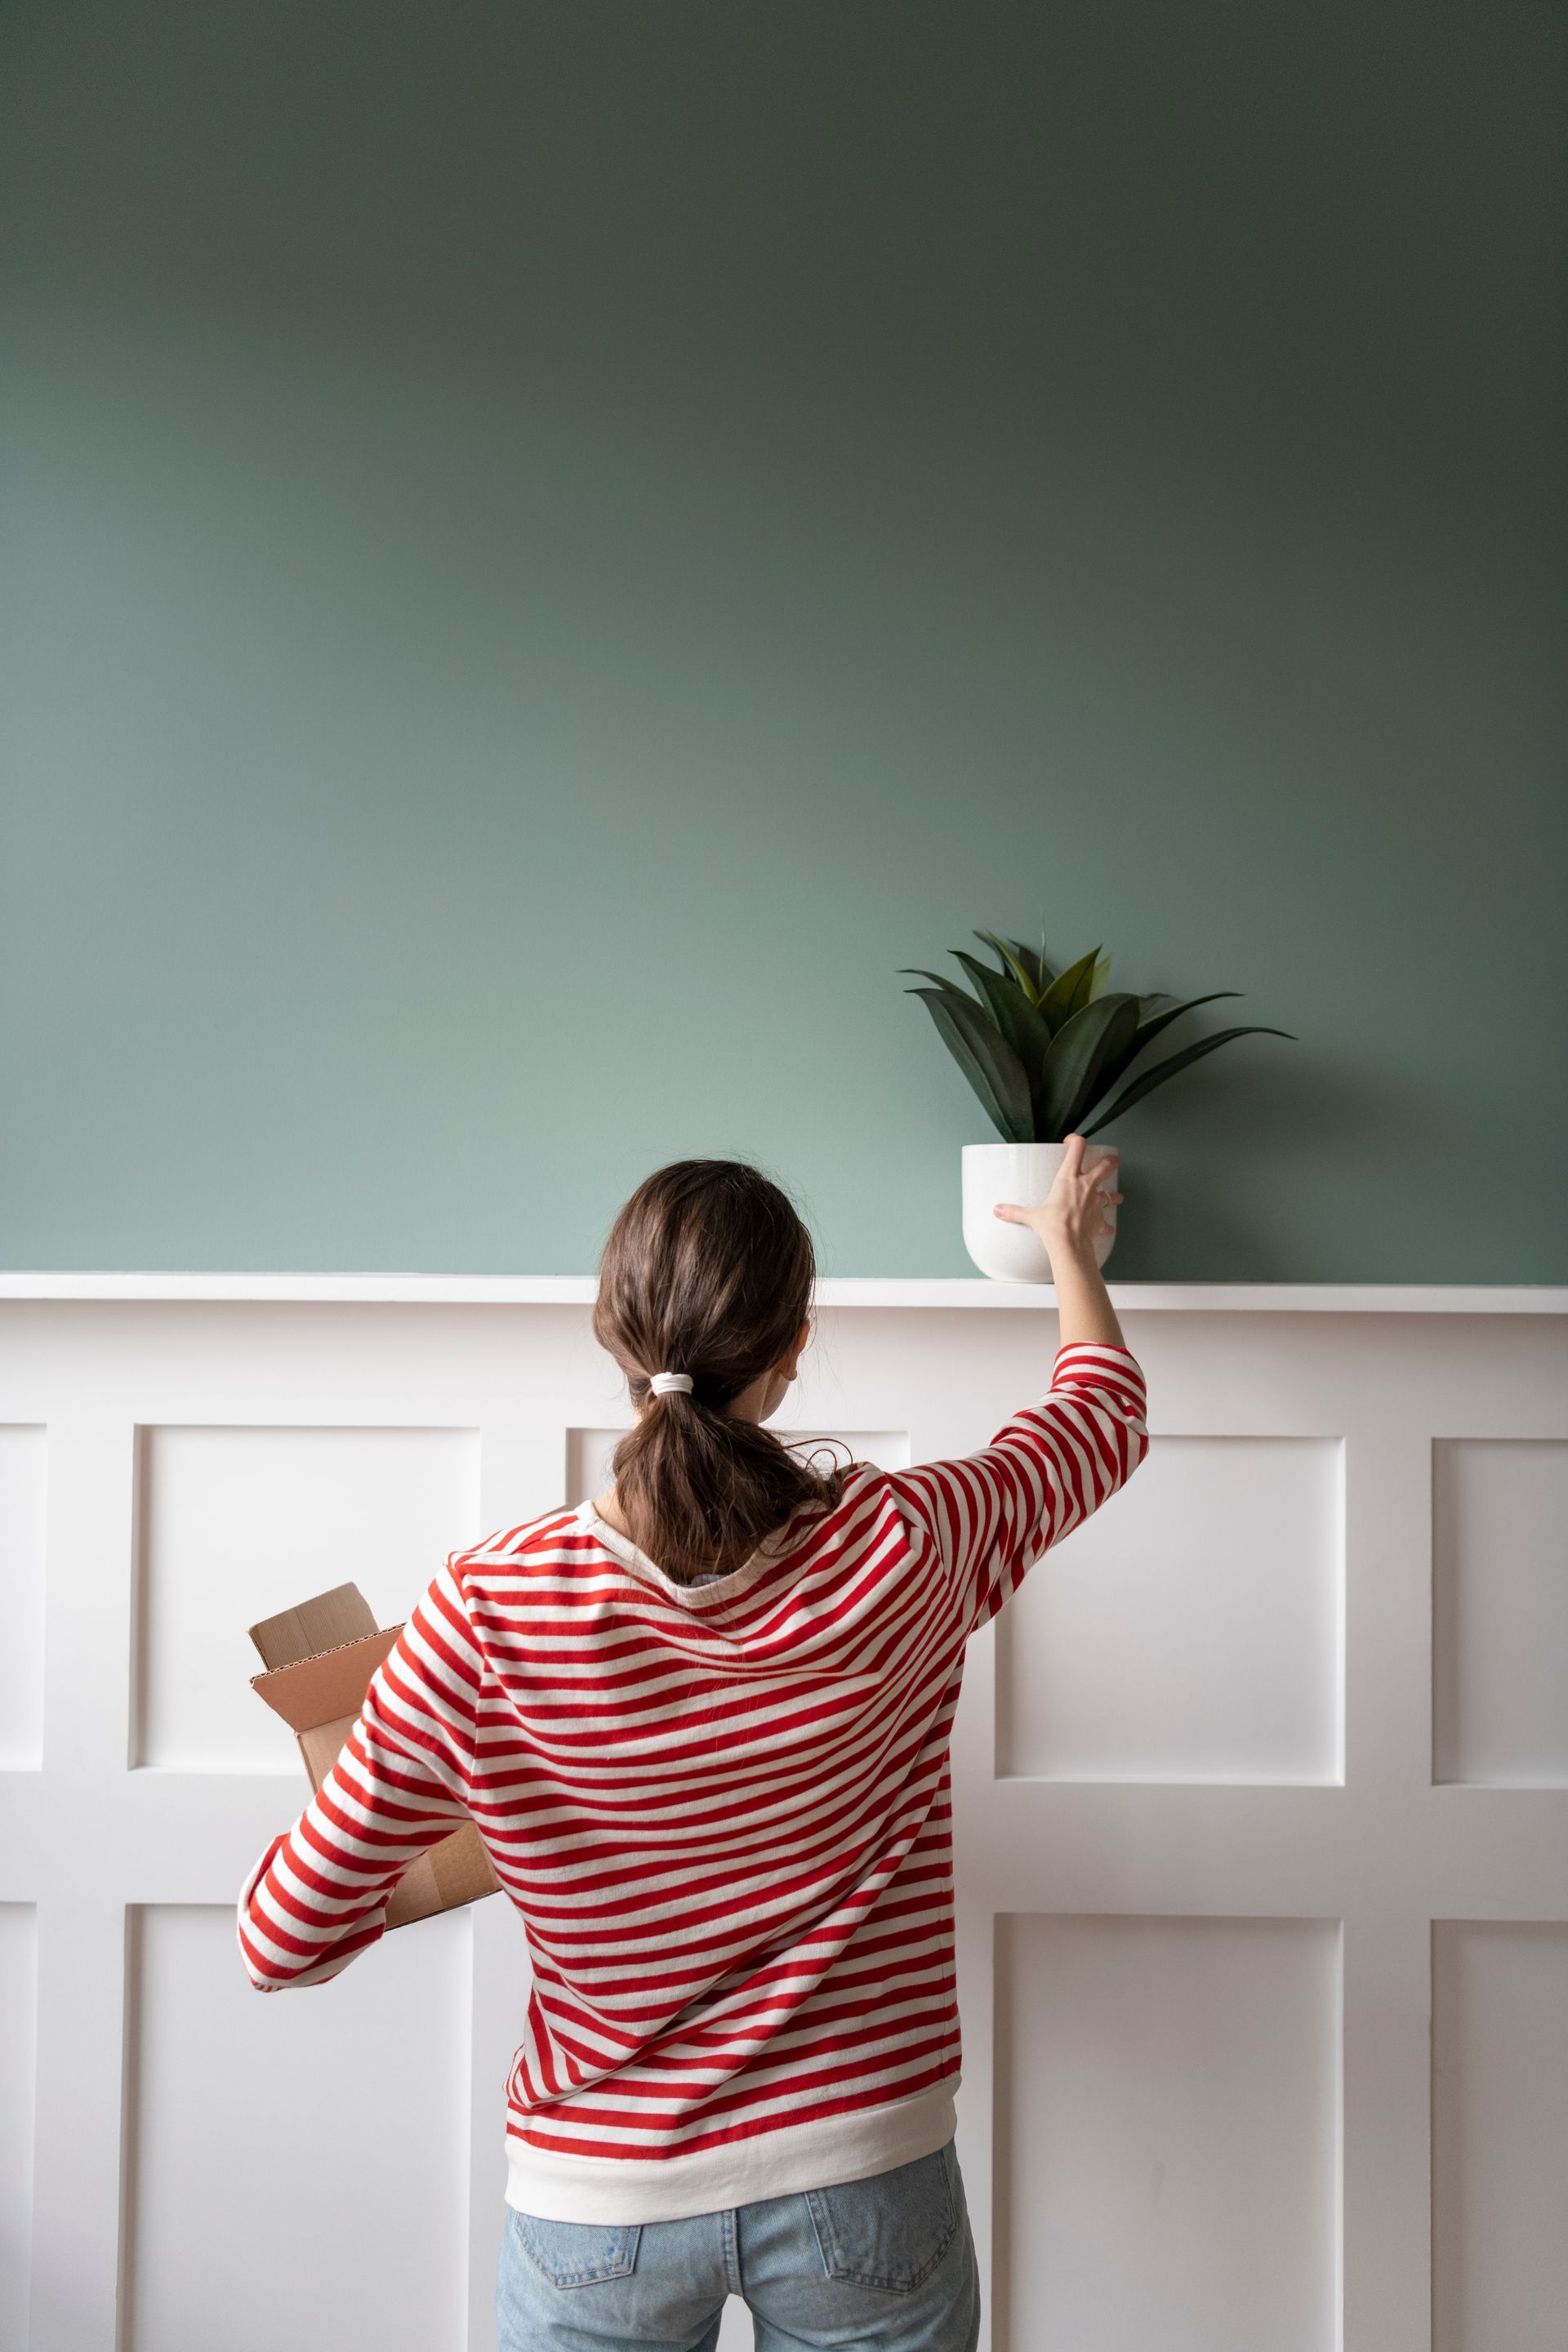 woman placing a potted plant in a room